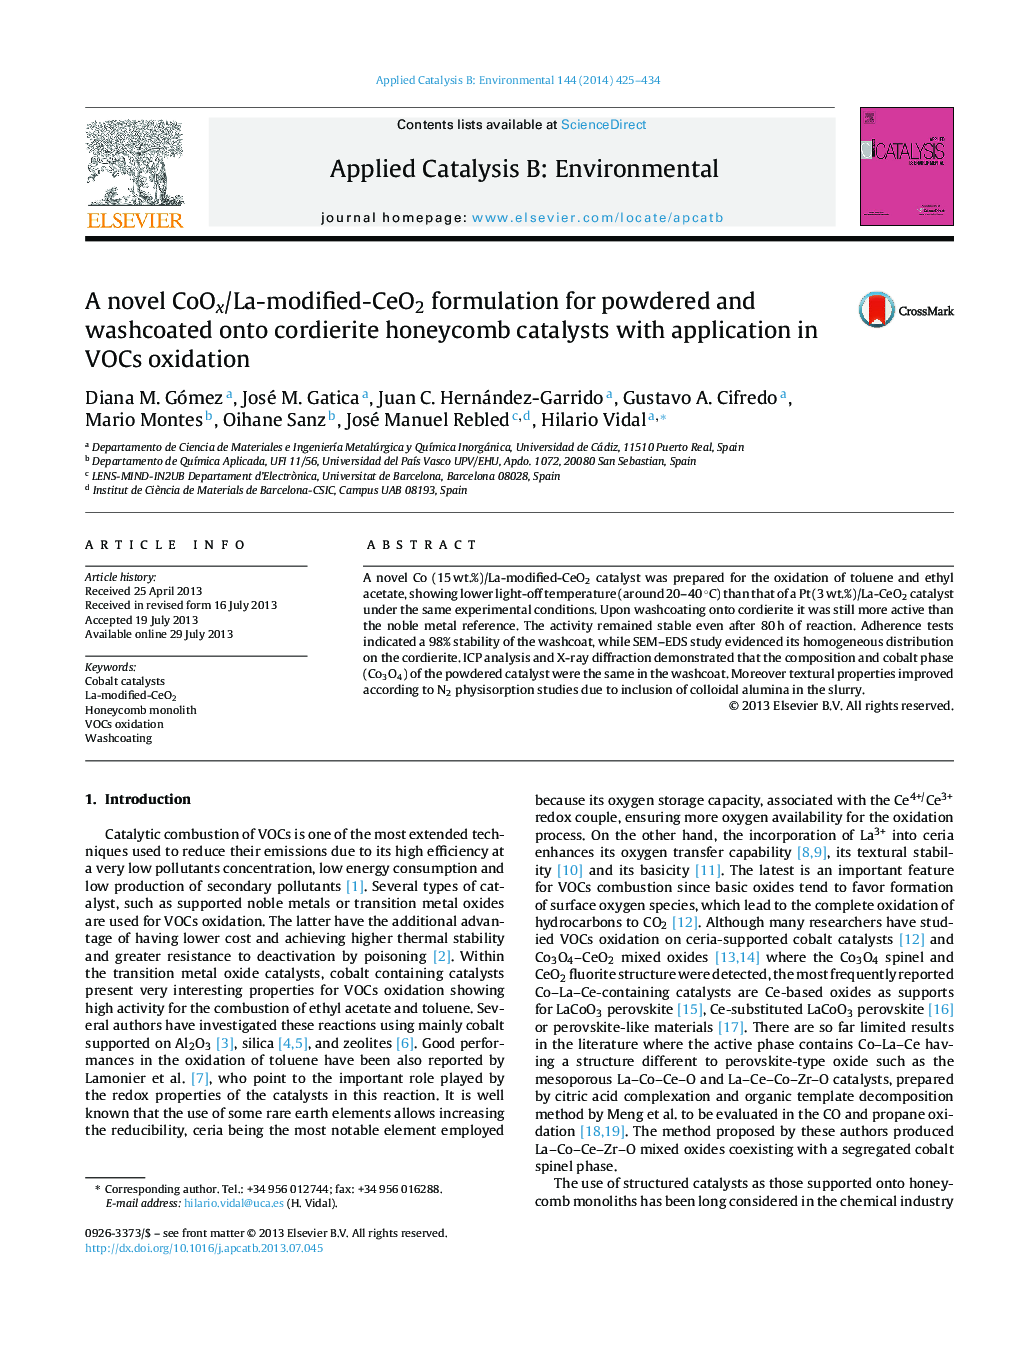 A novel CoOx/La-modified-CeO2 formulation for powdered and washcoated onto cordierite honeycomb catalysts with application in VOCs oxidation